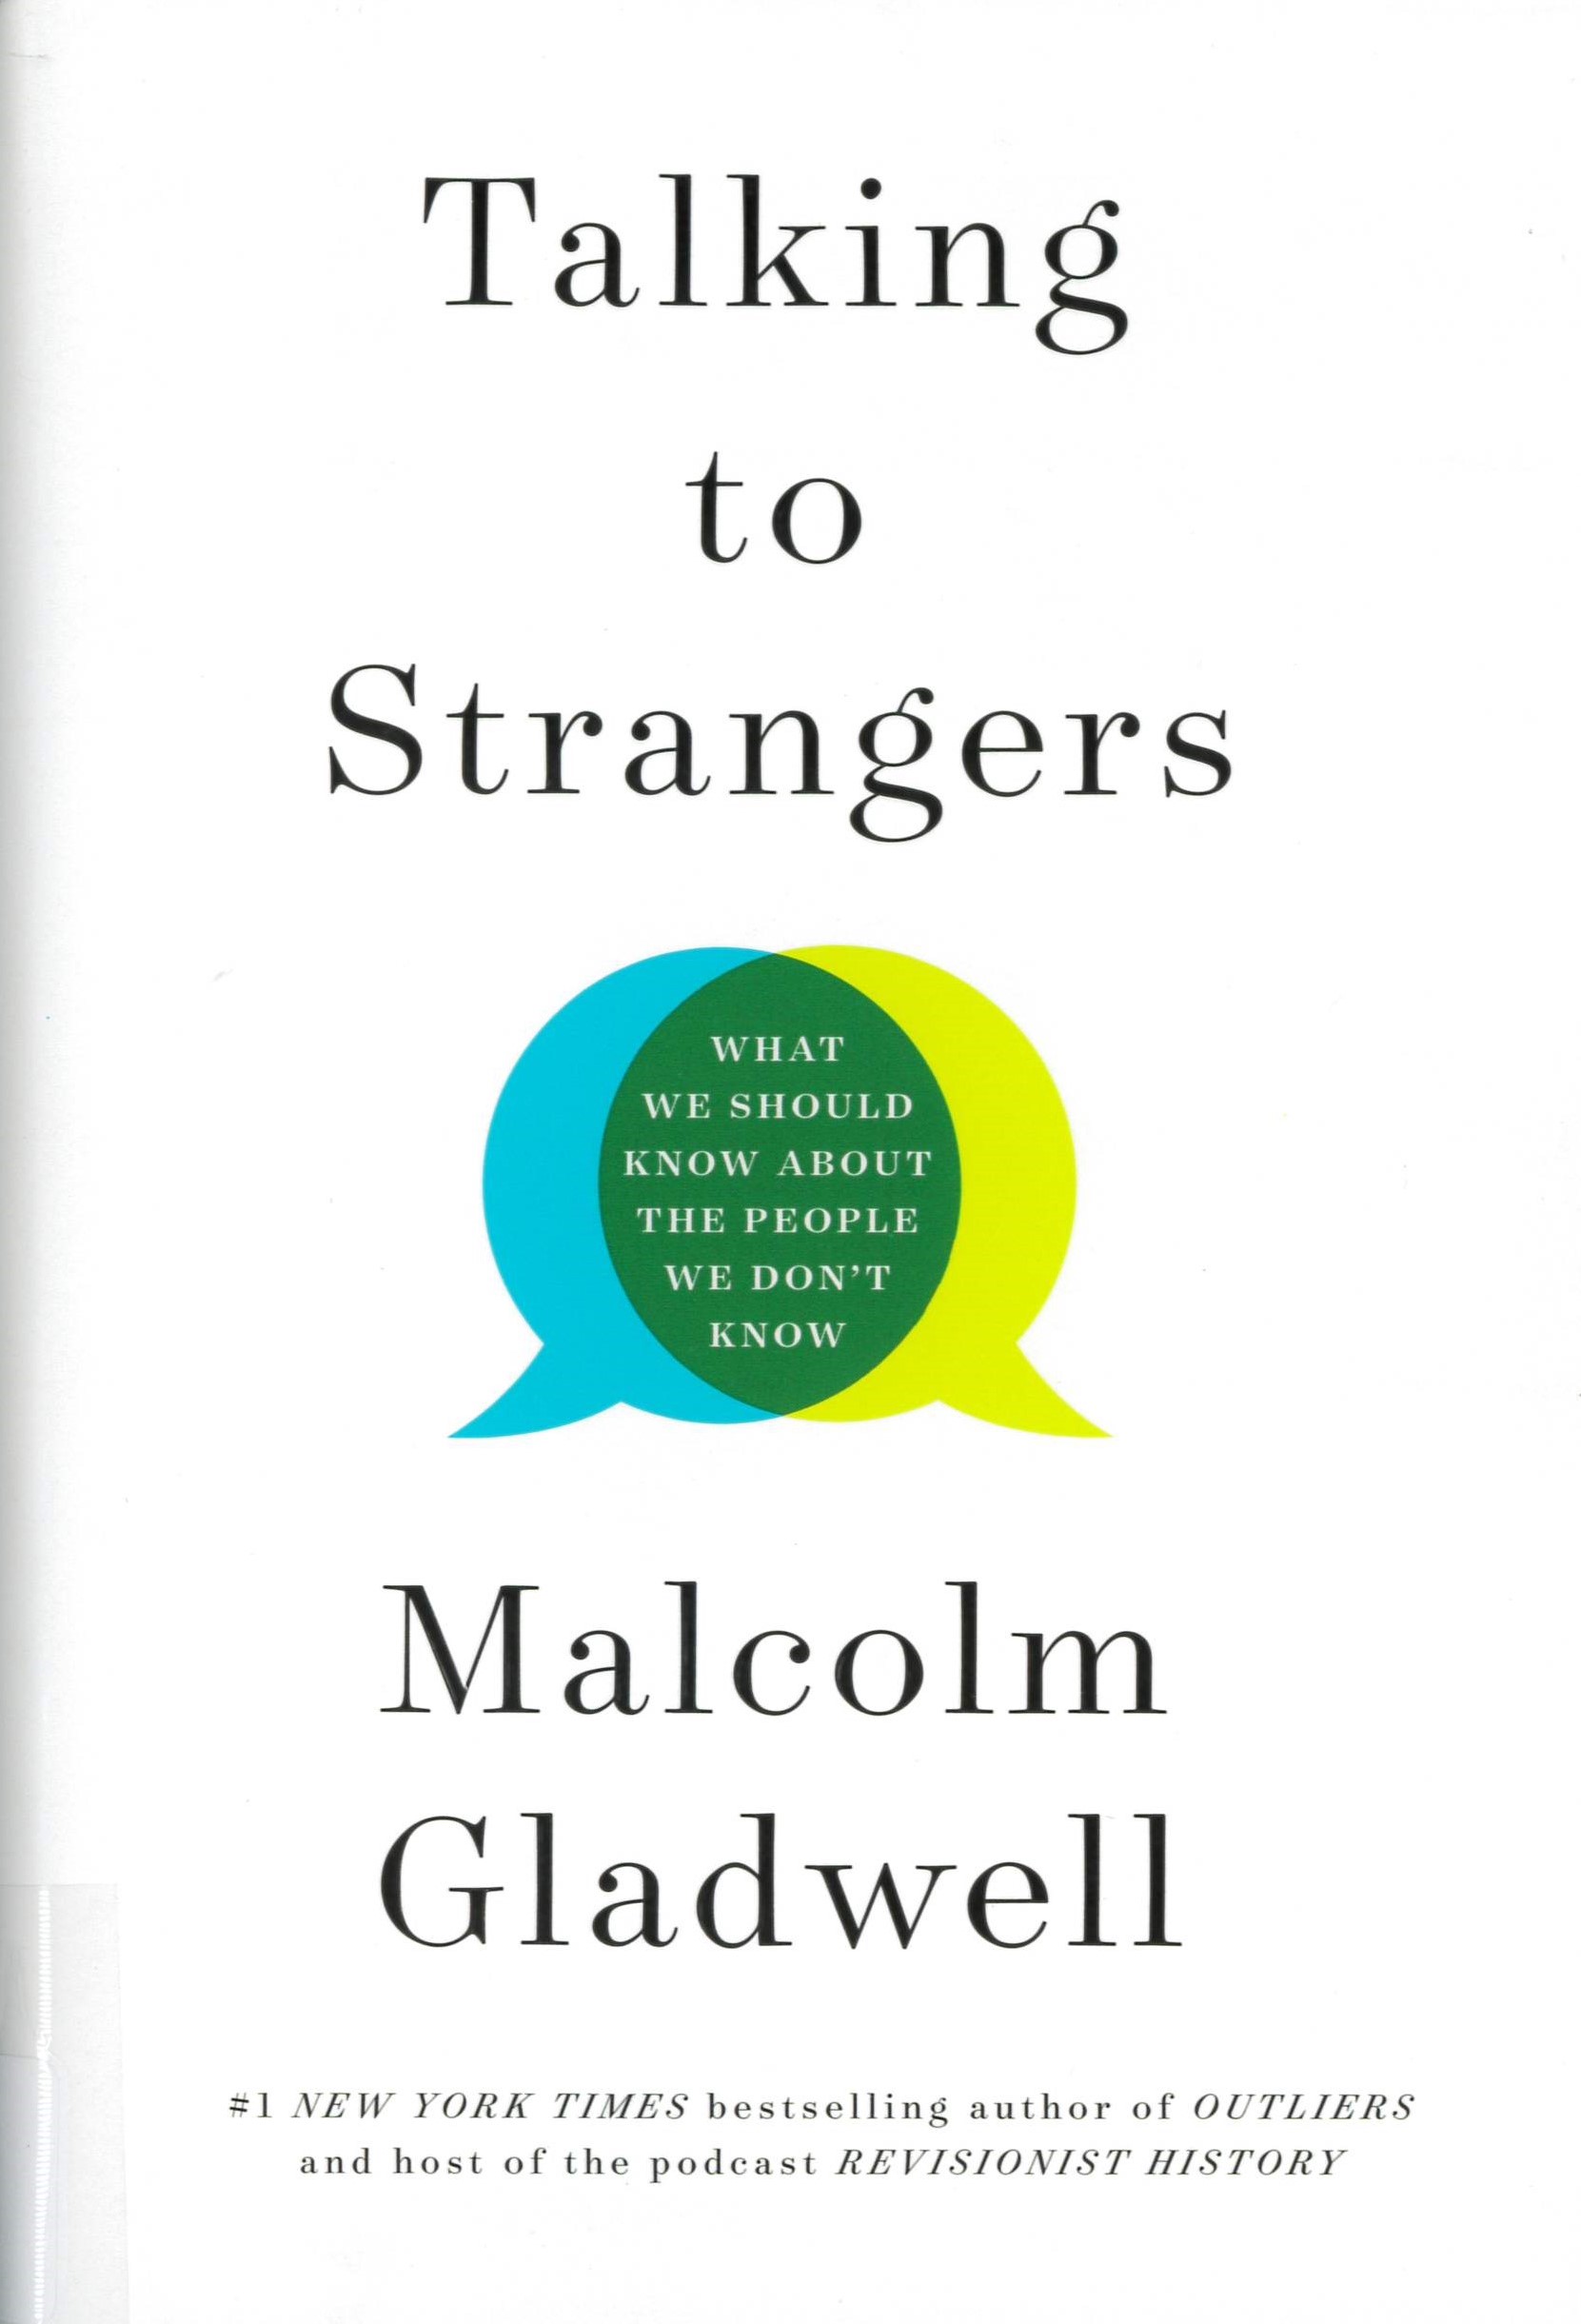 Talking to strangers : what we should know about the people we don